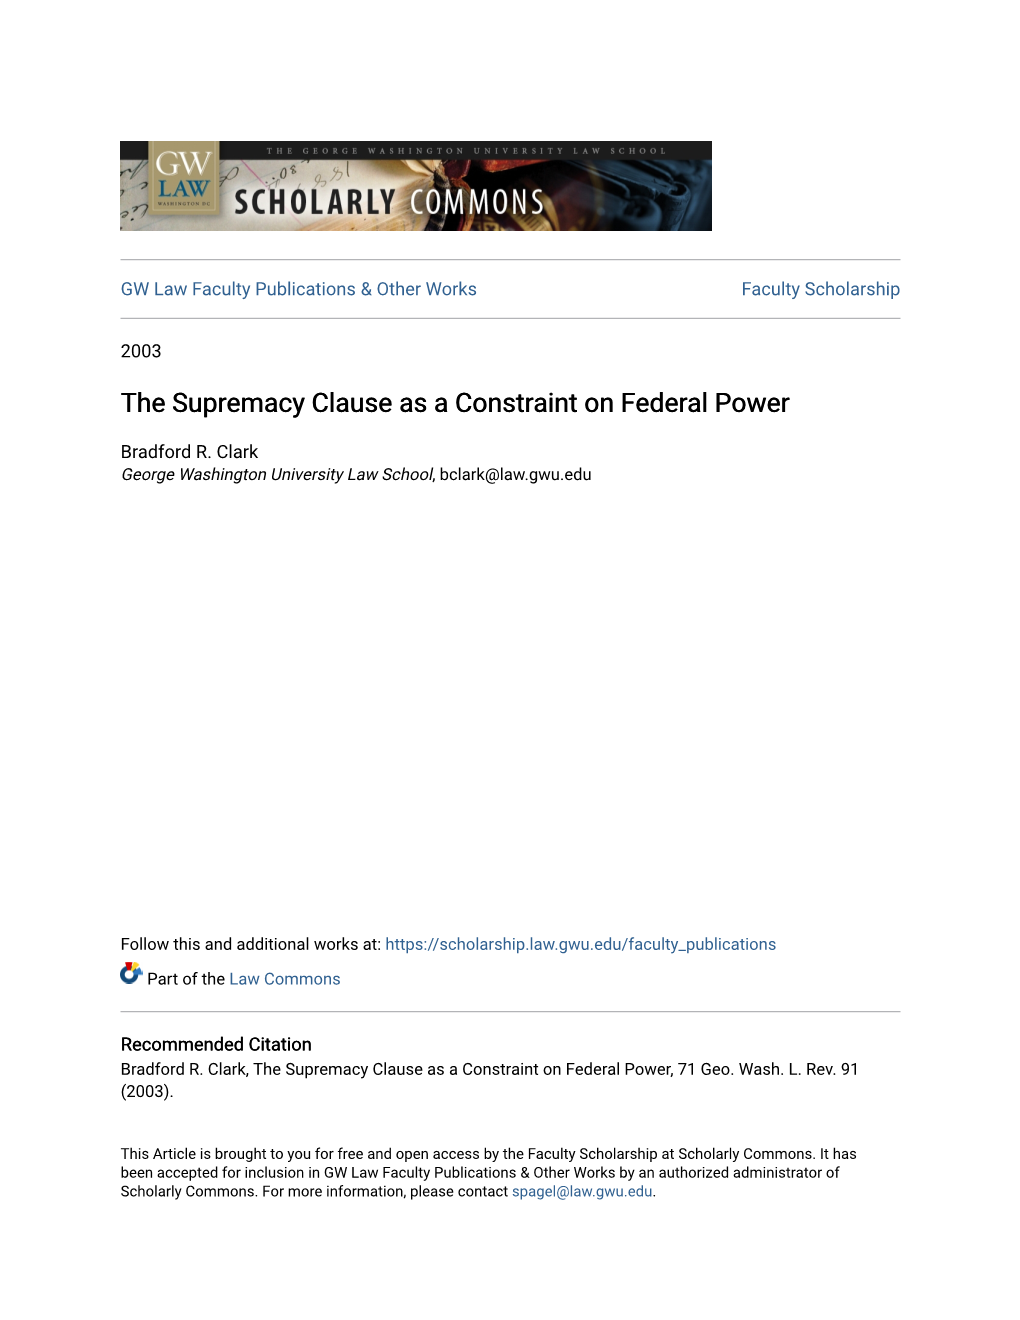 The Supremacy Clause As a Constraint on Federal Power